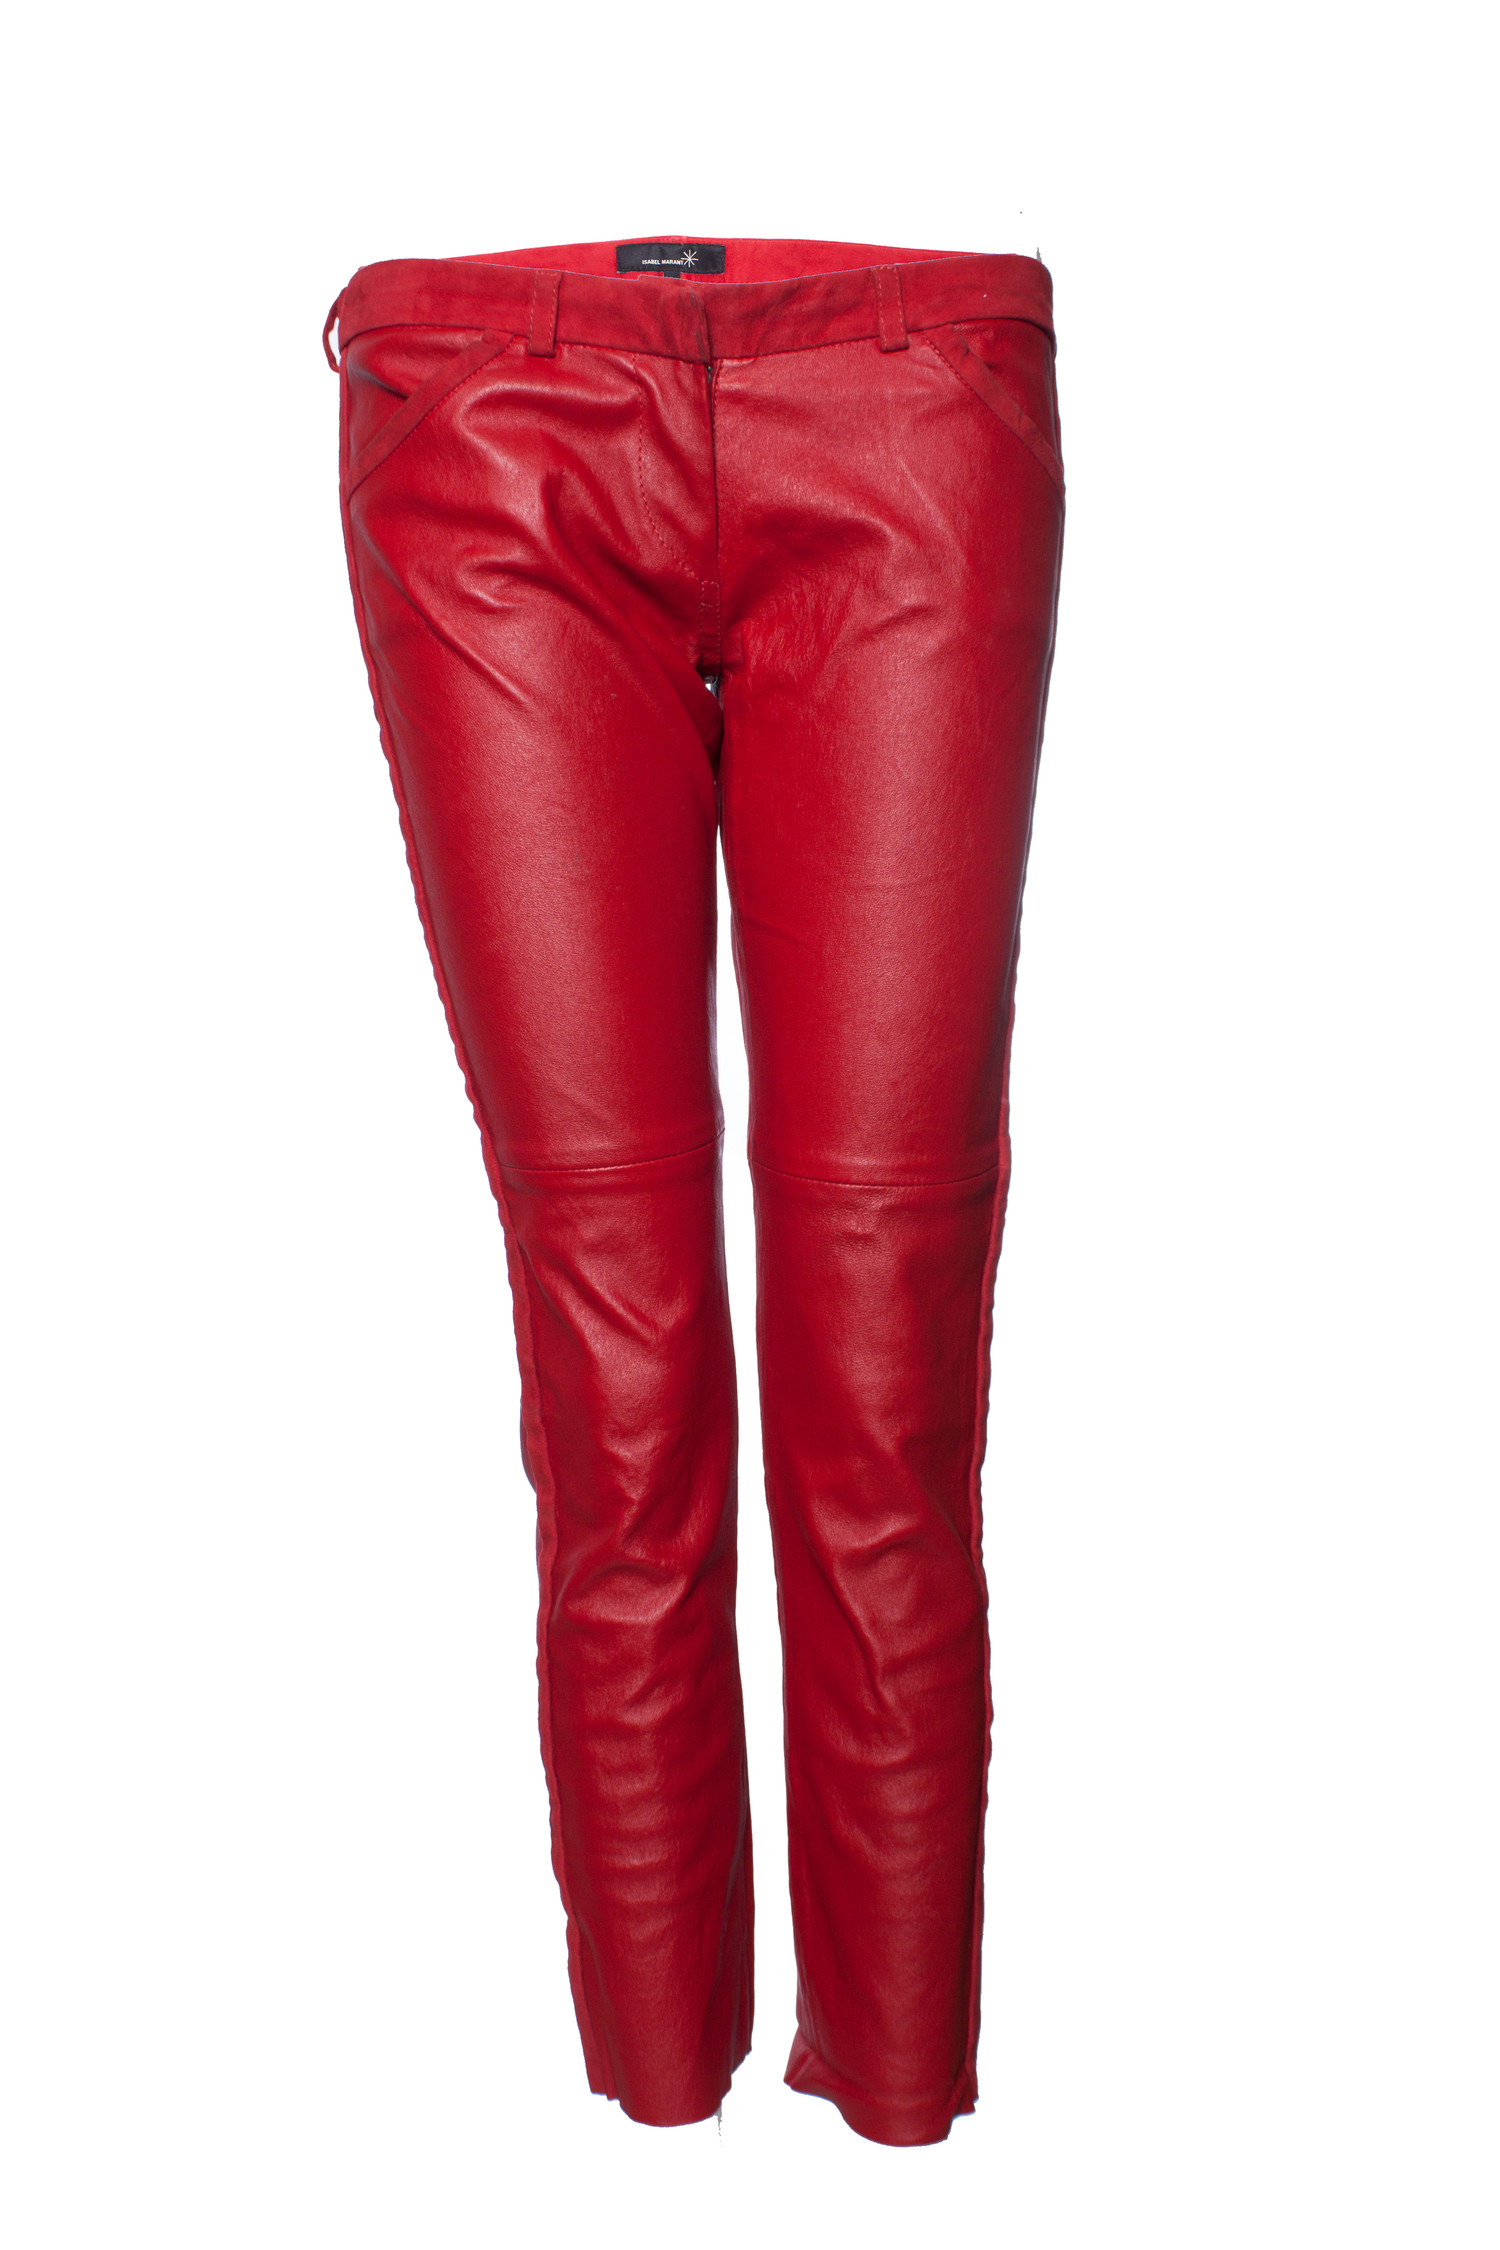 Motel rocks red leather trousers / pants Brand new... - Depop